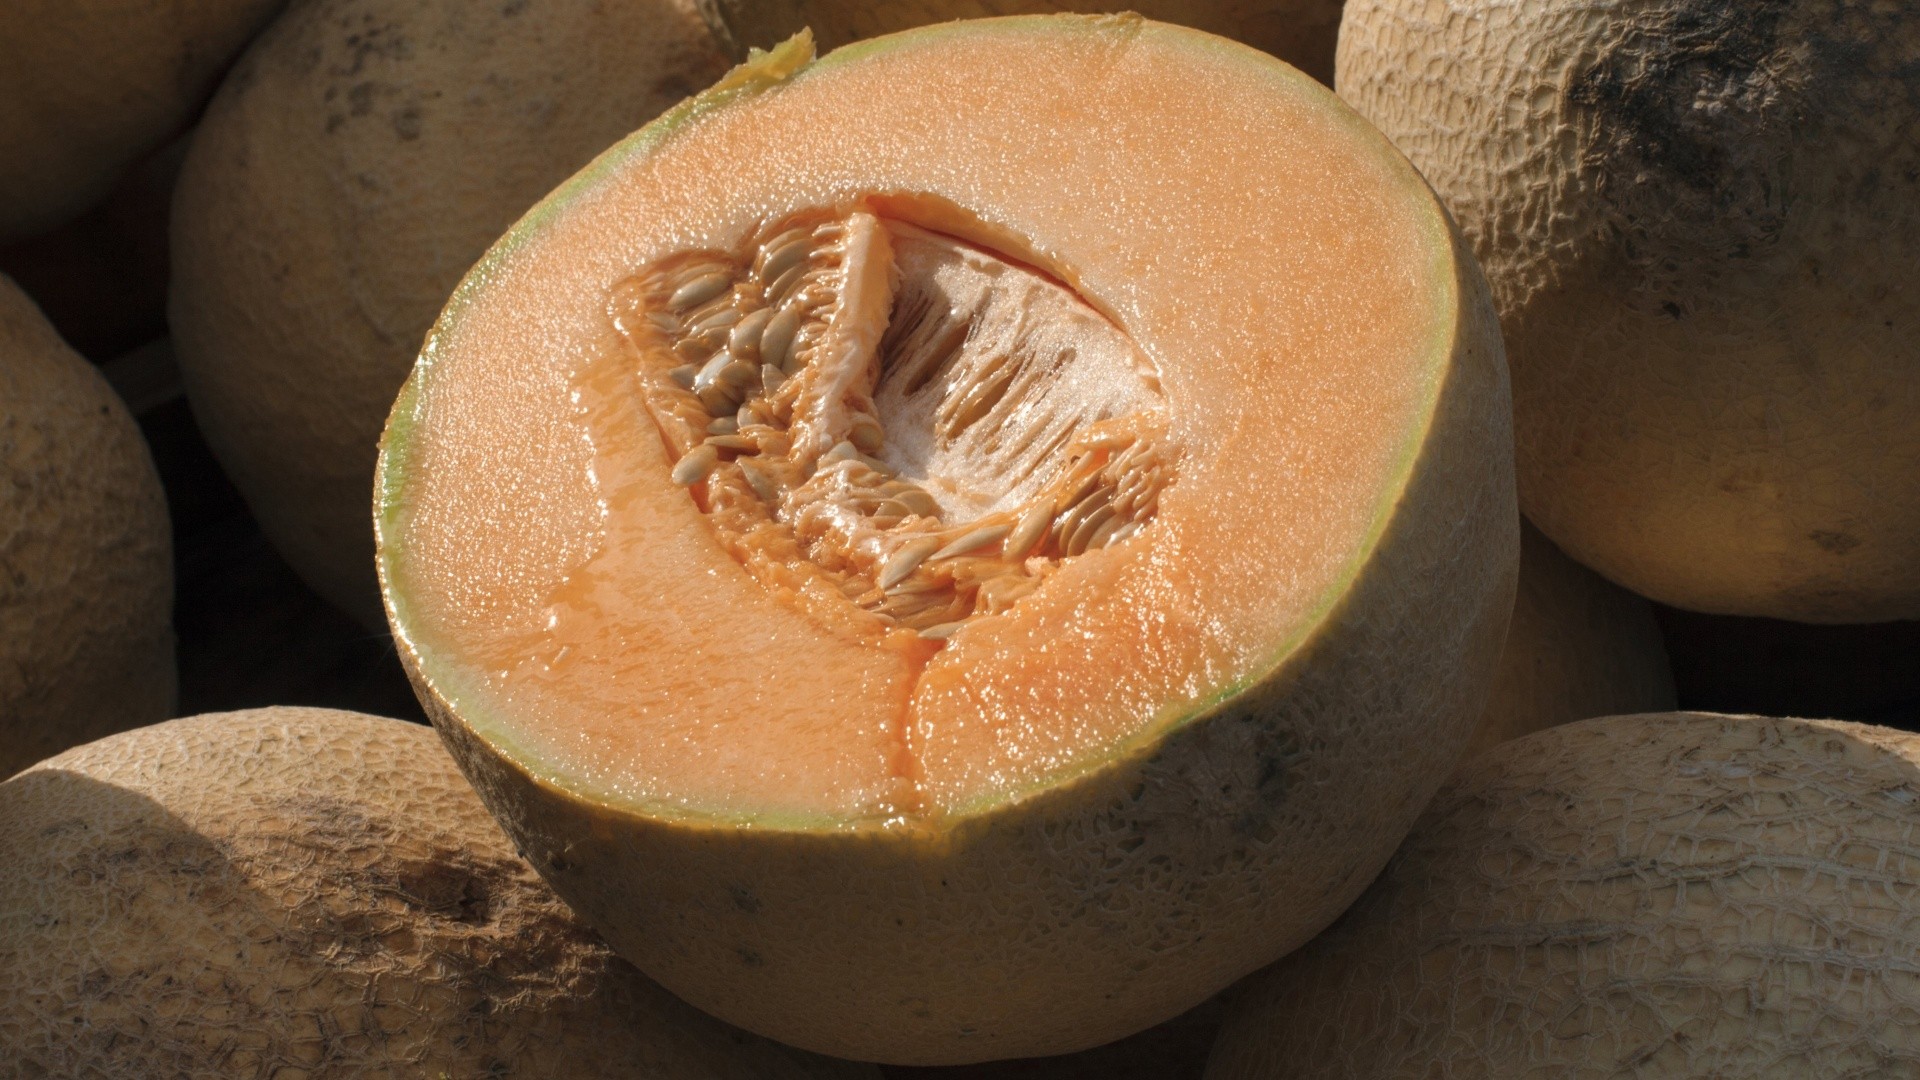 More deaths blamed for salmonella outbreak from cantaloupes